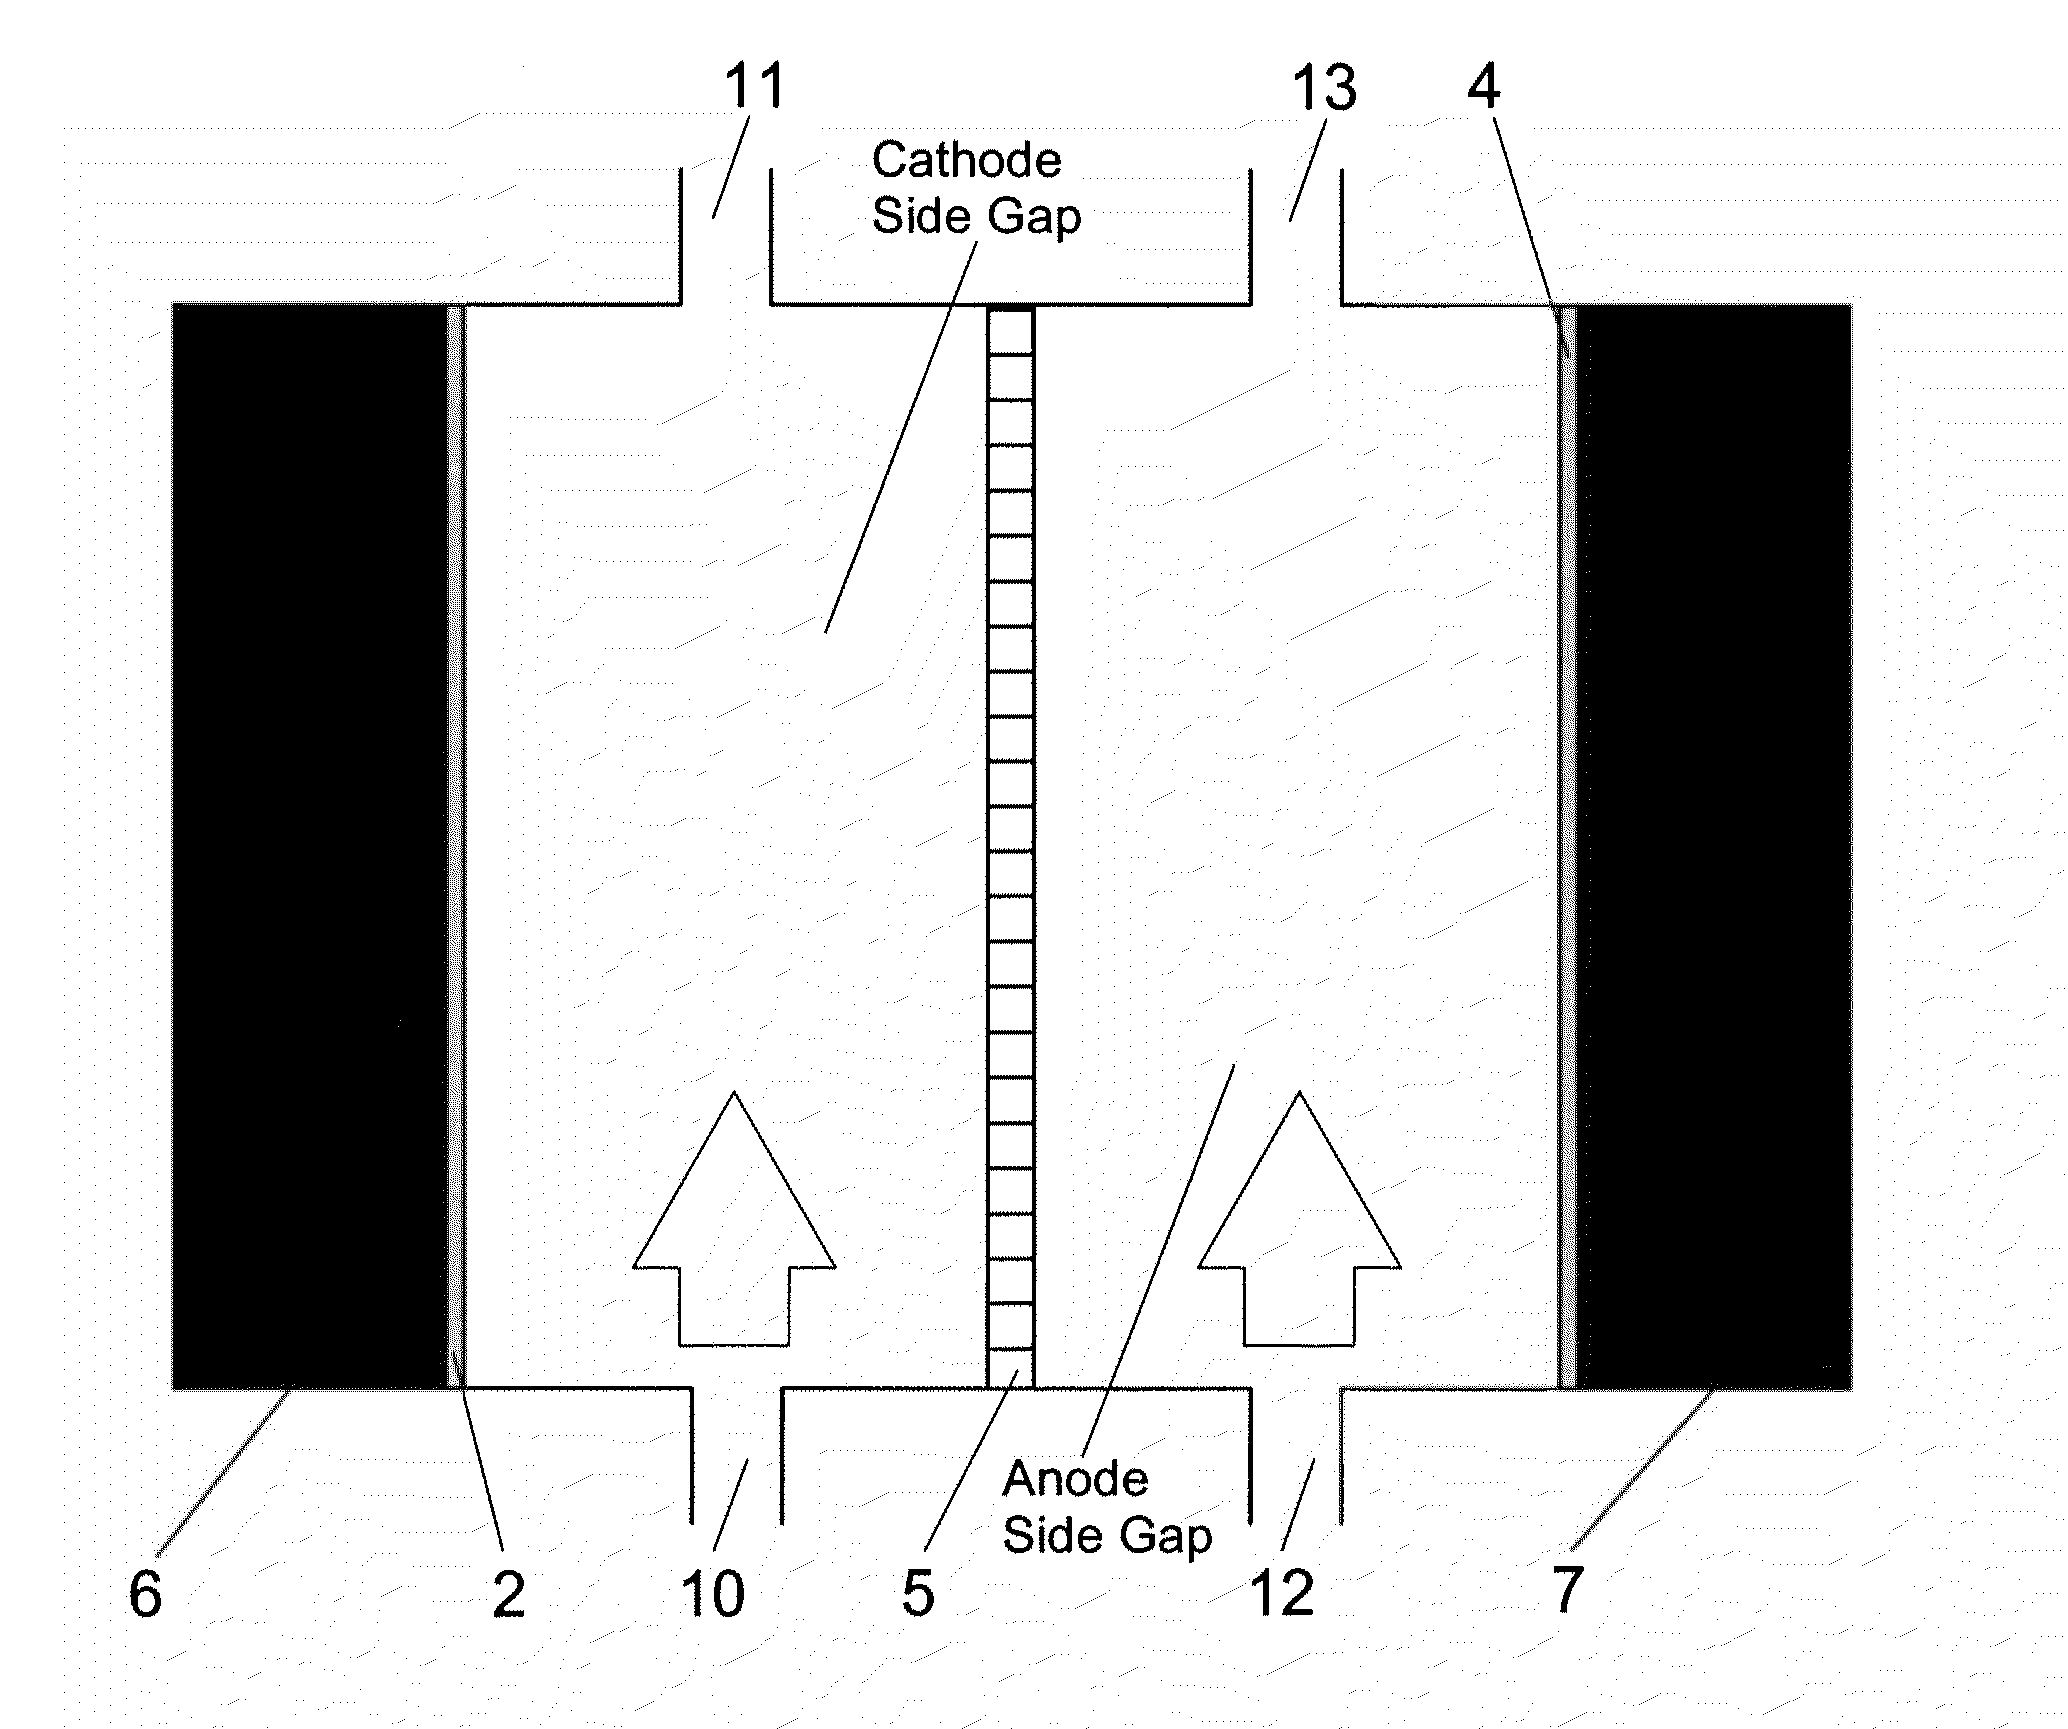 Electrolysis Cell for the Conversion of Cuprous Chloride in Hydrochloric Acid to Cupric Chloride and Hydrogen Gas